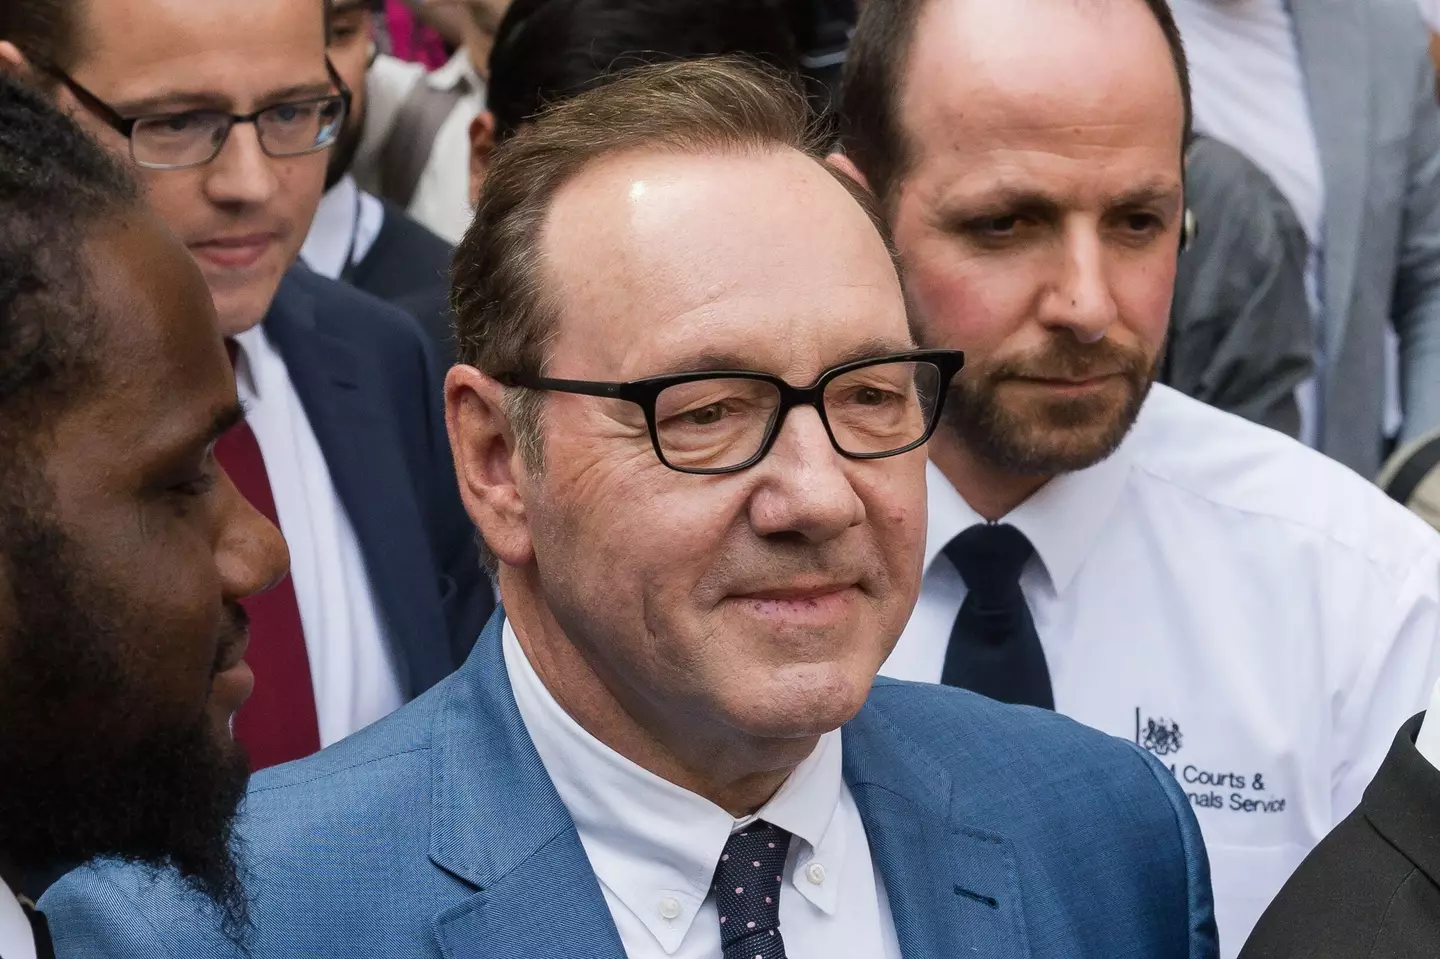 Kevin Spacey pictured leaving court after being charged with sexual offences against three men, he pleaded not guity.